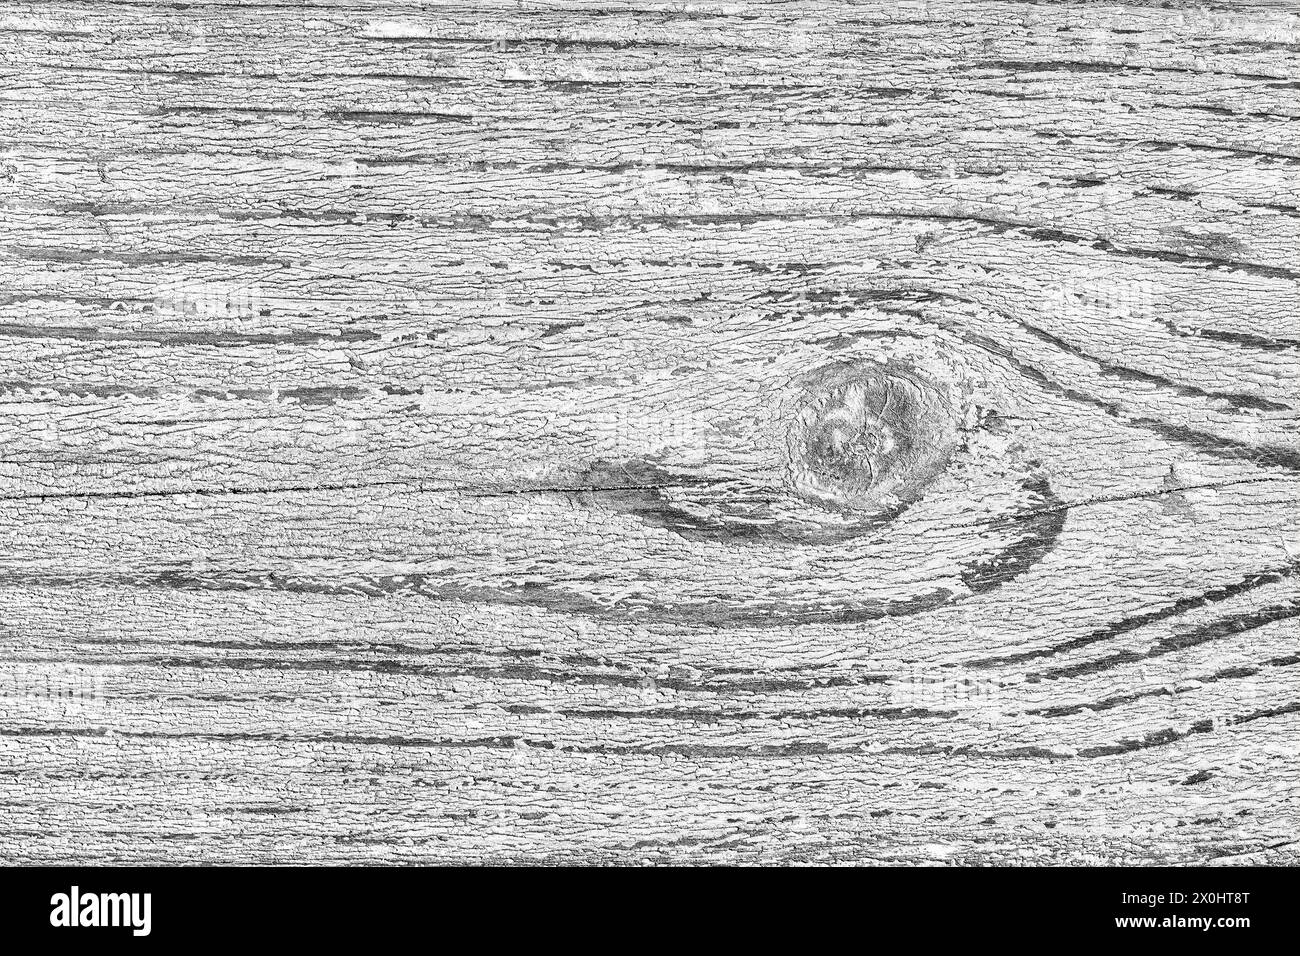 Rustic grey wooden texture with knot detail. High-resolution image showcasing the intricate patterns of a weathered grey wood grain. Stock Photo